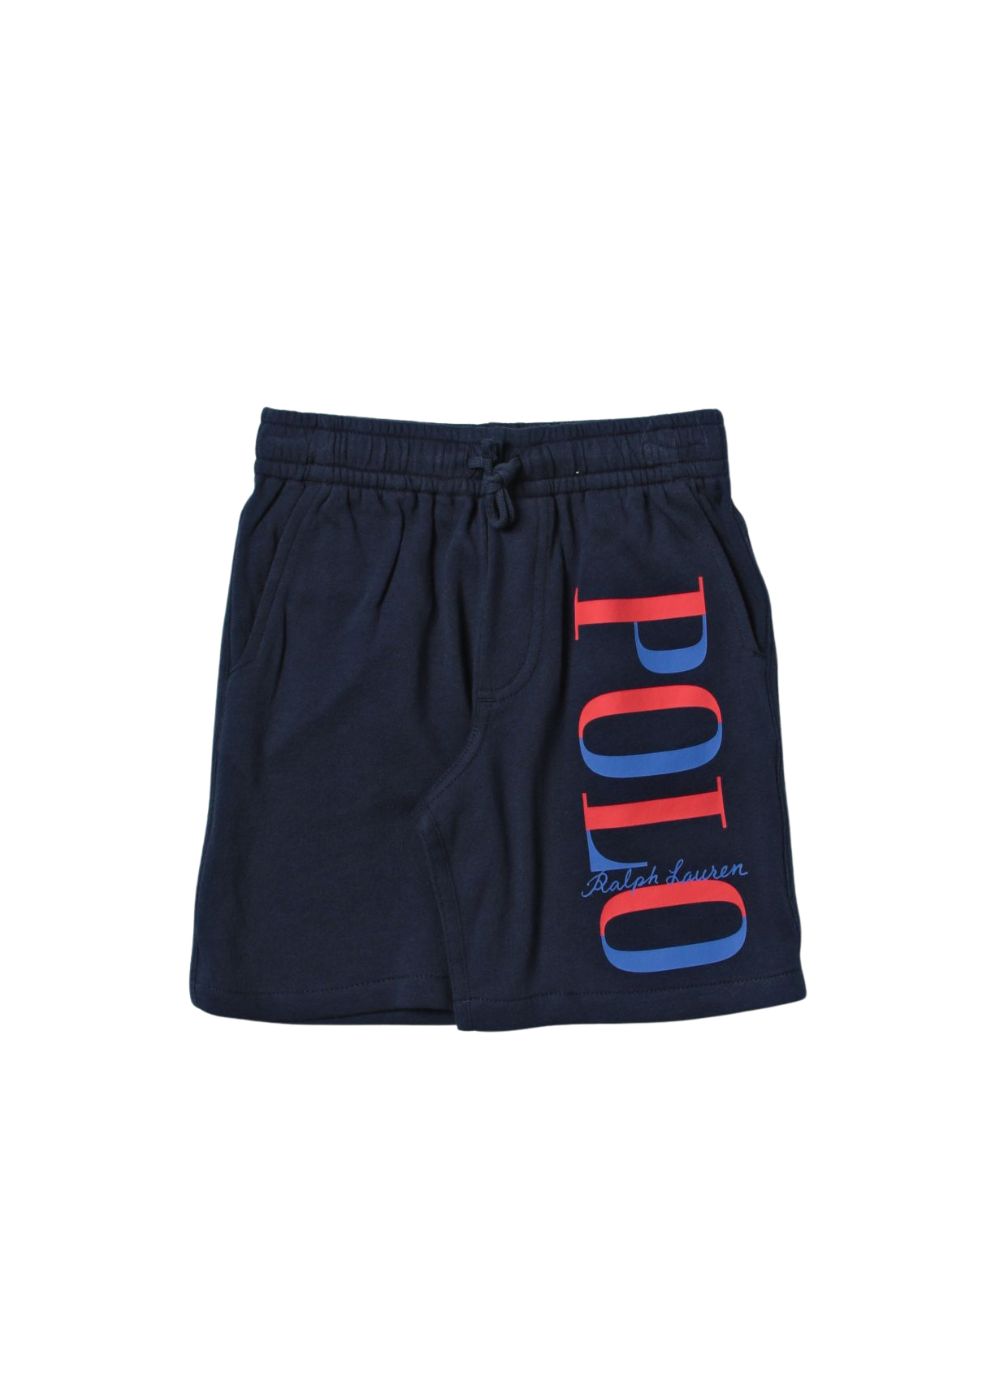 Featured image for “Polo Ralph Lauren Short in felpa”